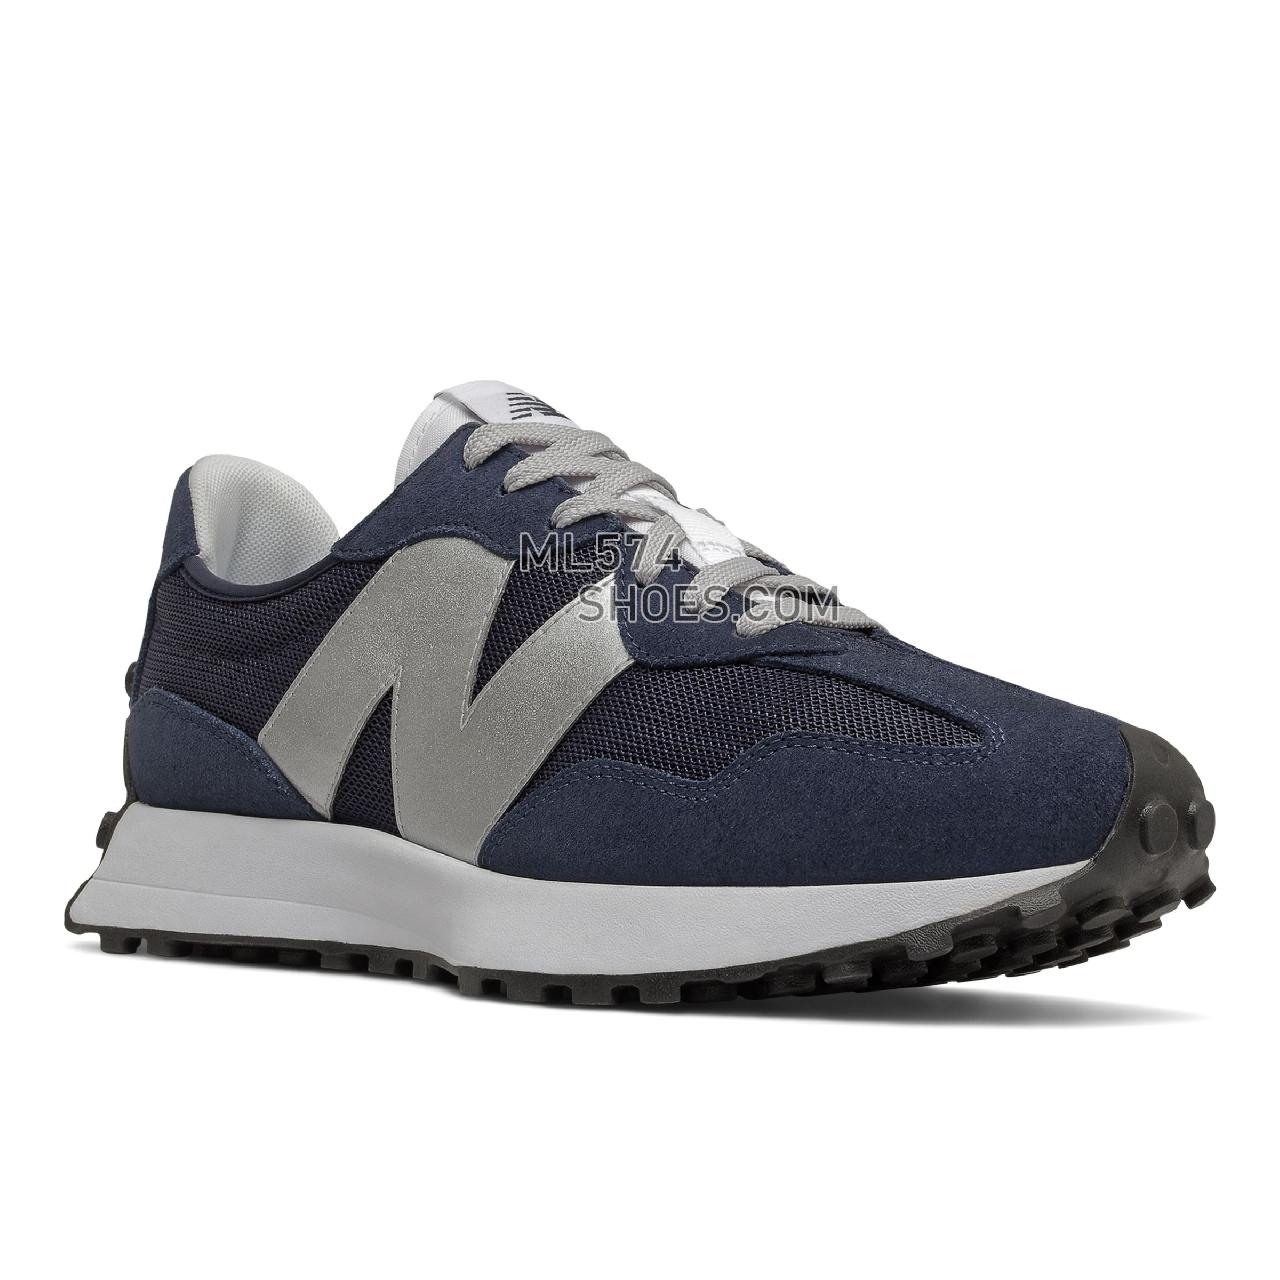 New Balance 327 - Men's Sport Style Sneakers - Natural Indigo with Metallic Silver - MS327MD1